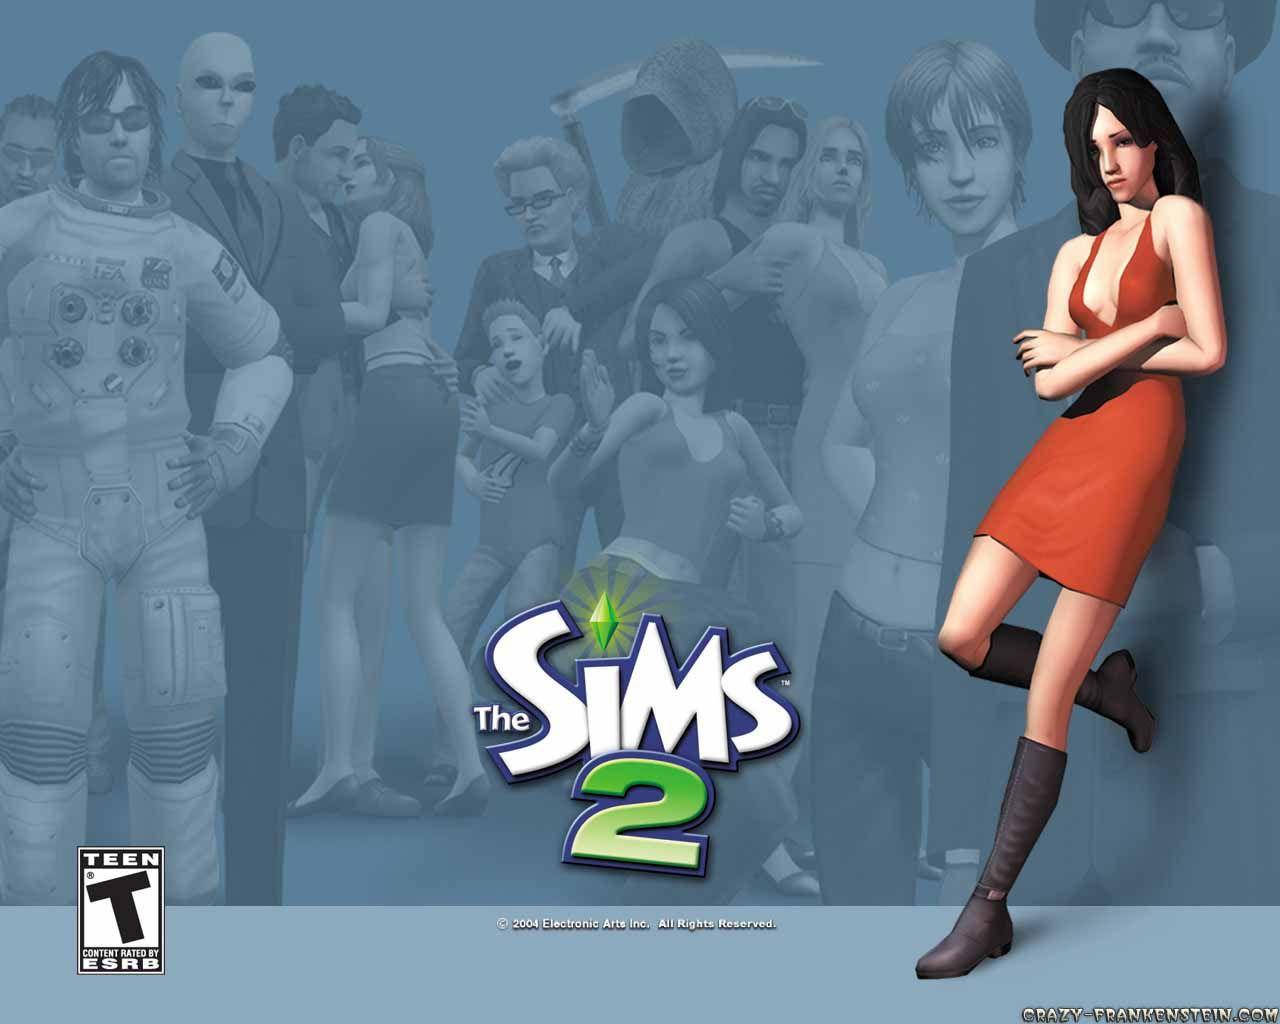 Lady In Red The Sims Wallpaper